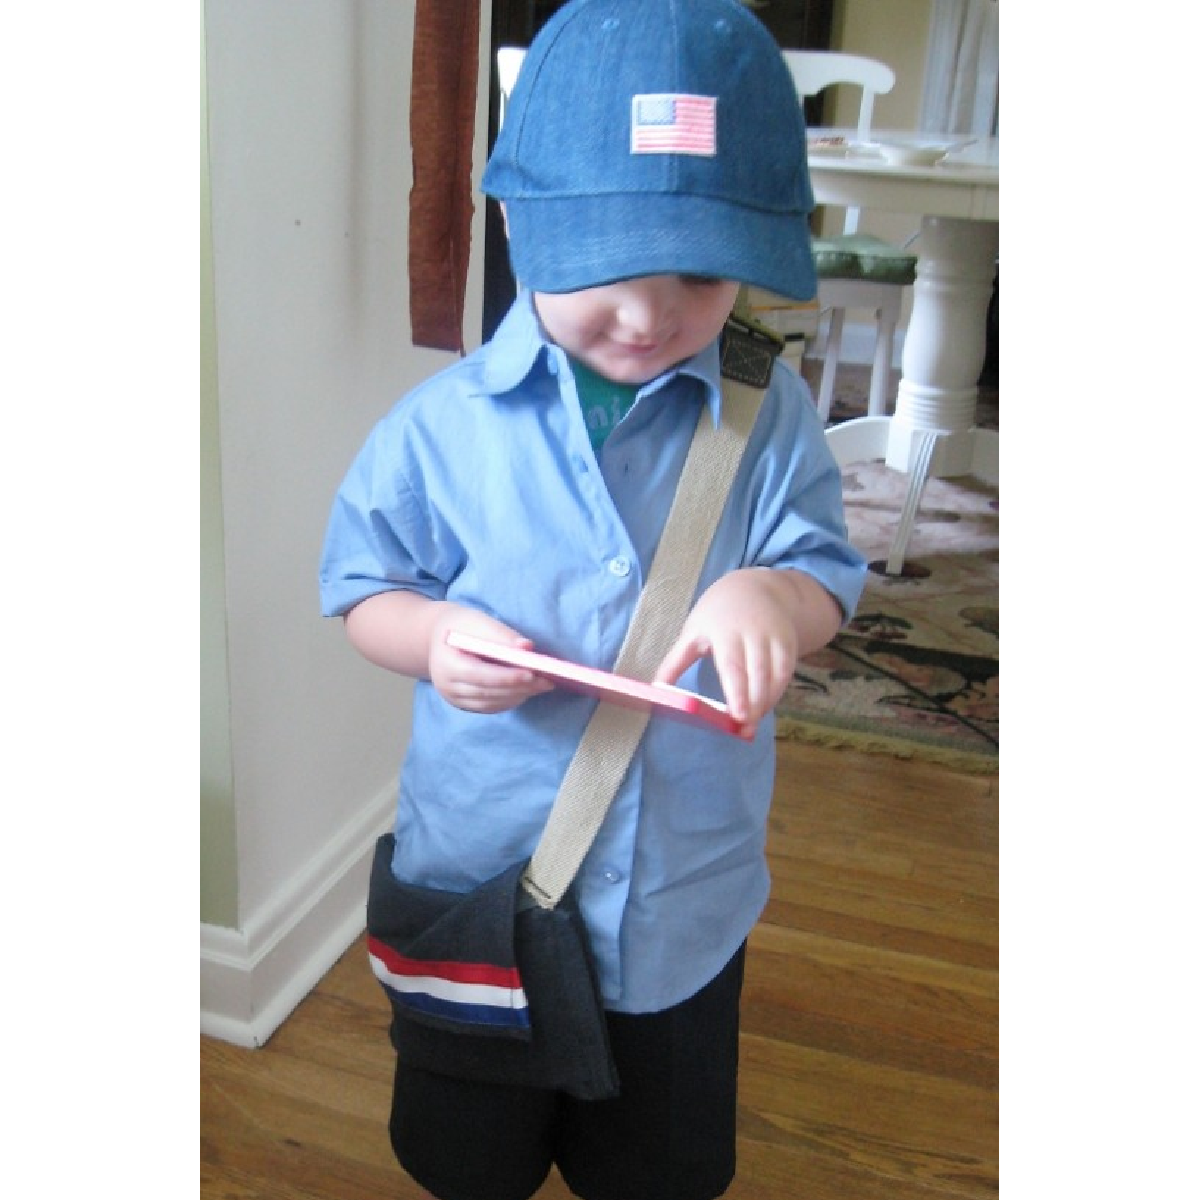 Dress up ideas- little boy in blue clothes with bag dressed like mail man- kids activities blog